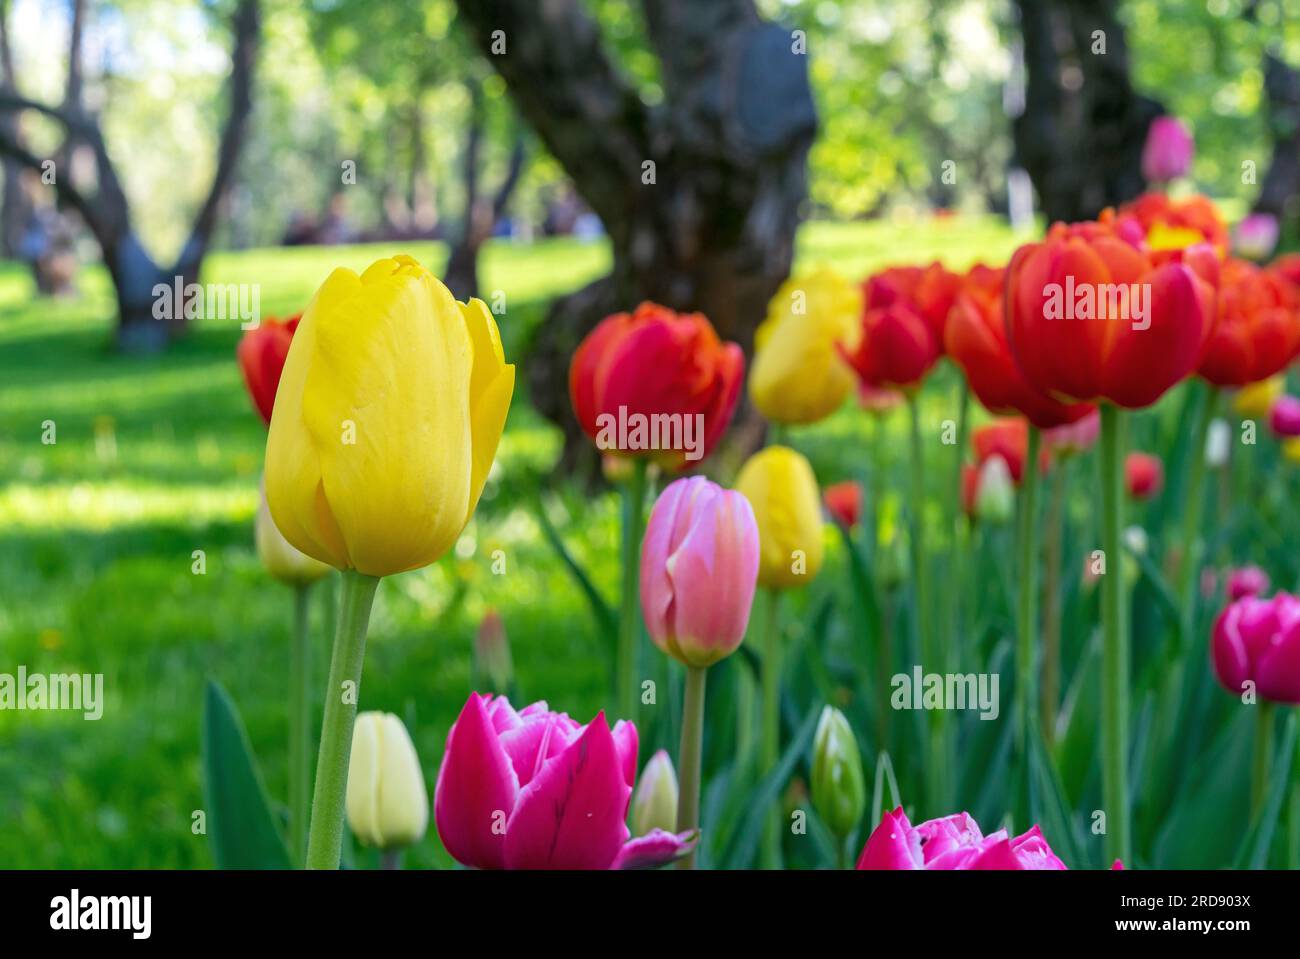 Multicolored Gesner's tulips in the city park. Spring flowering tulips. Stock Photo